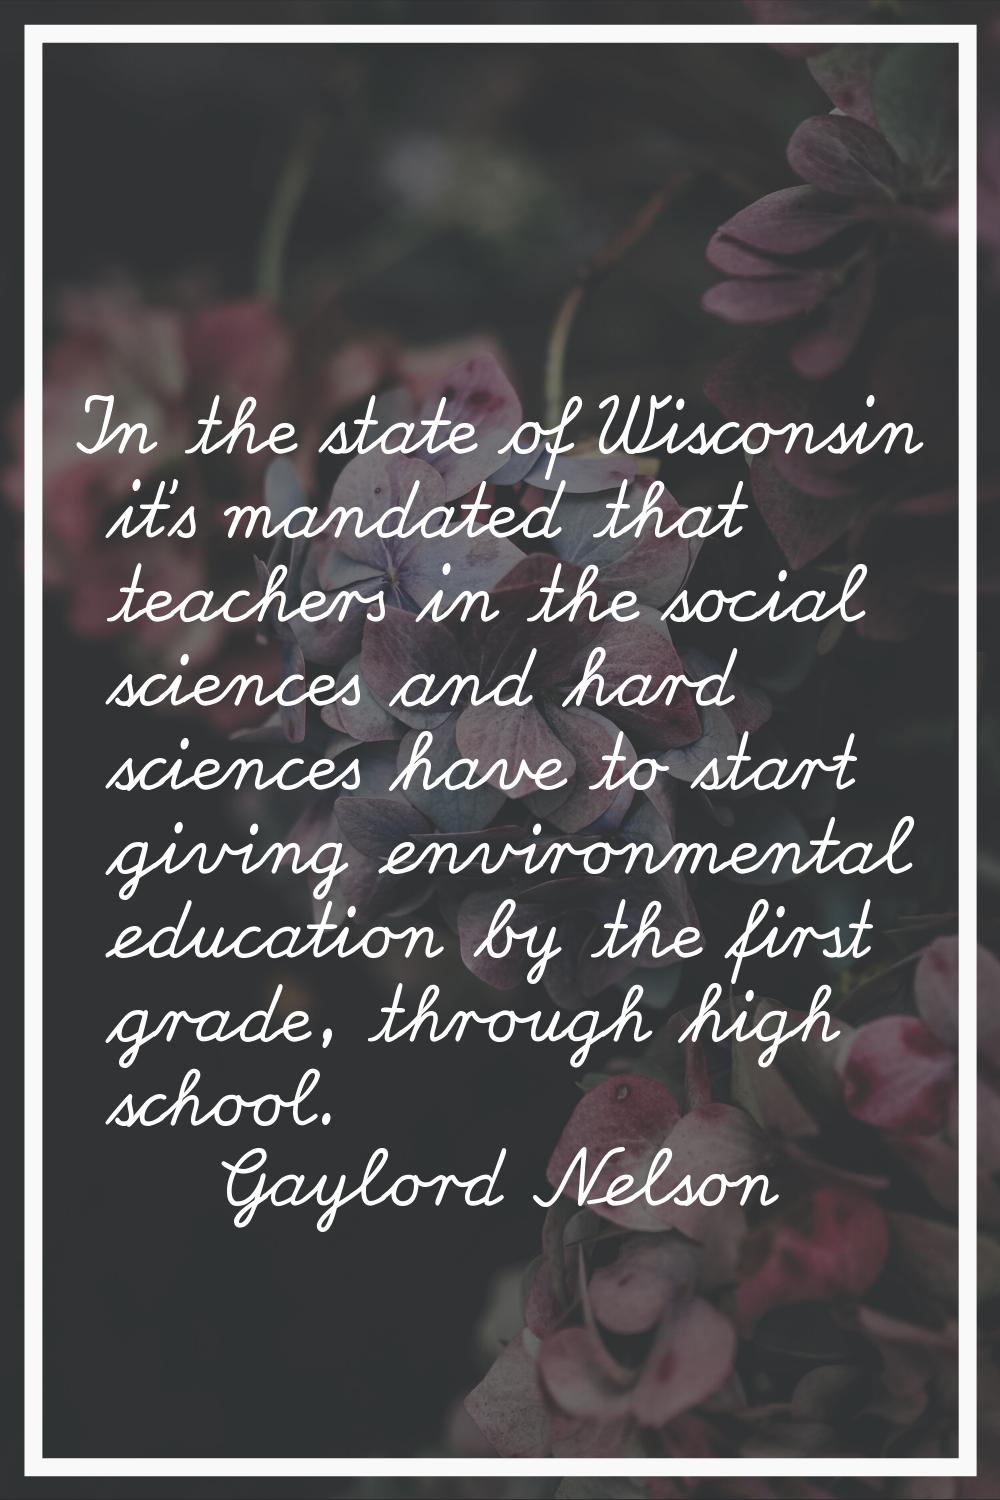 In the state of Wisconsin it's mandated that teachers in the social sciences and hard sciences have